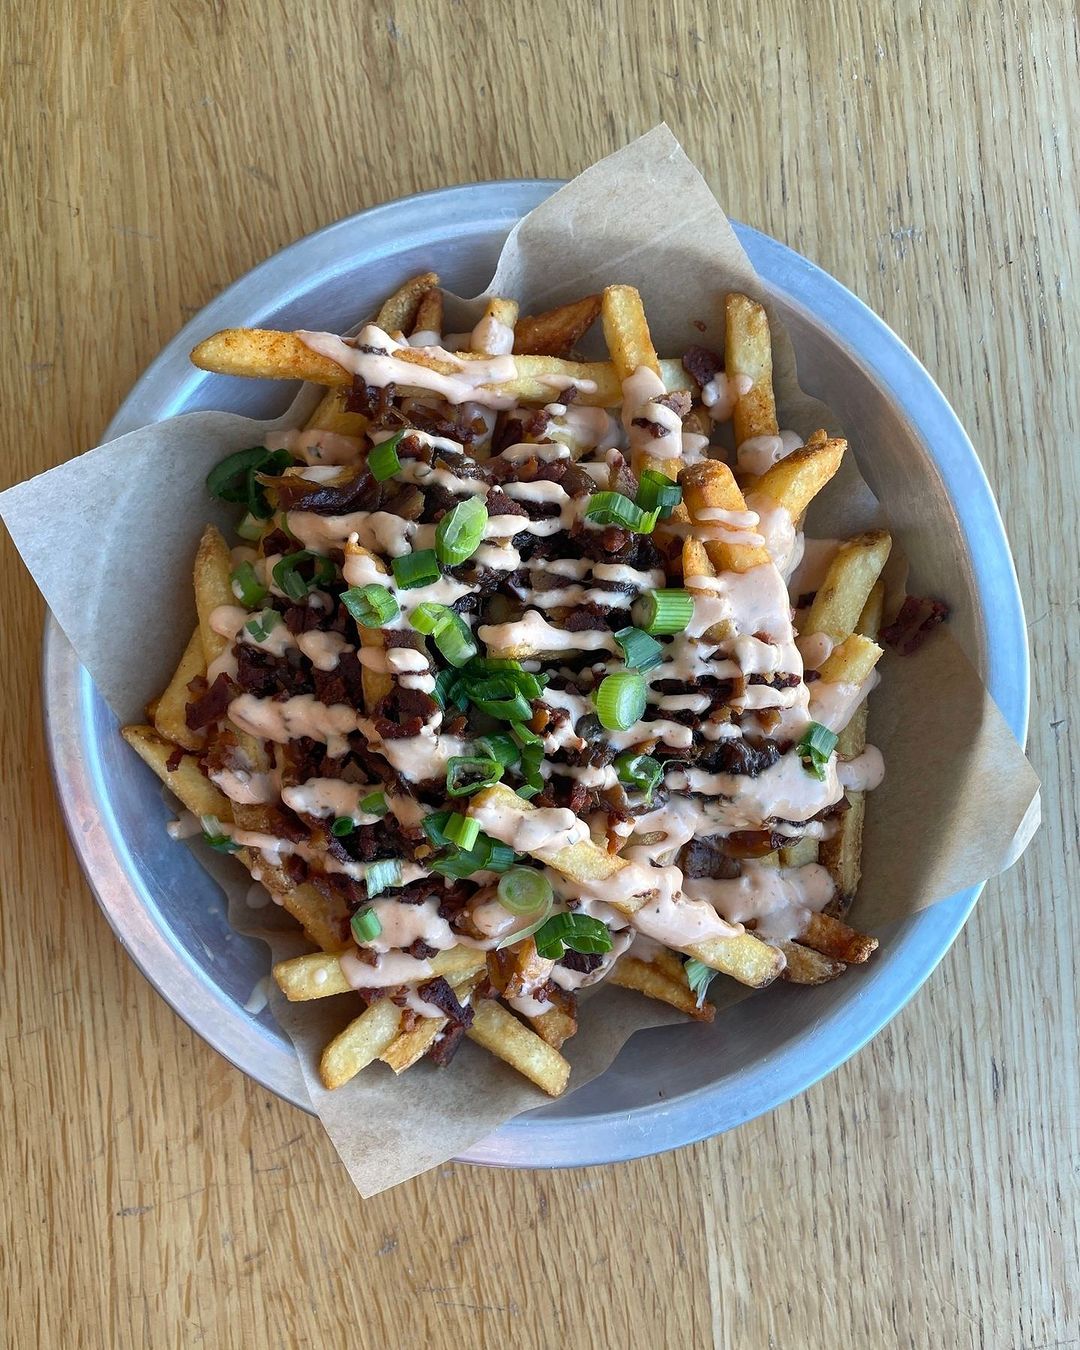 Vegan loaded fries from J. Selby's